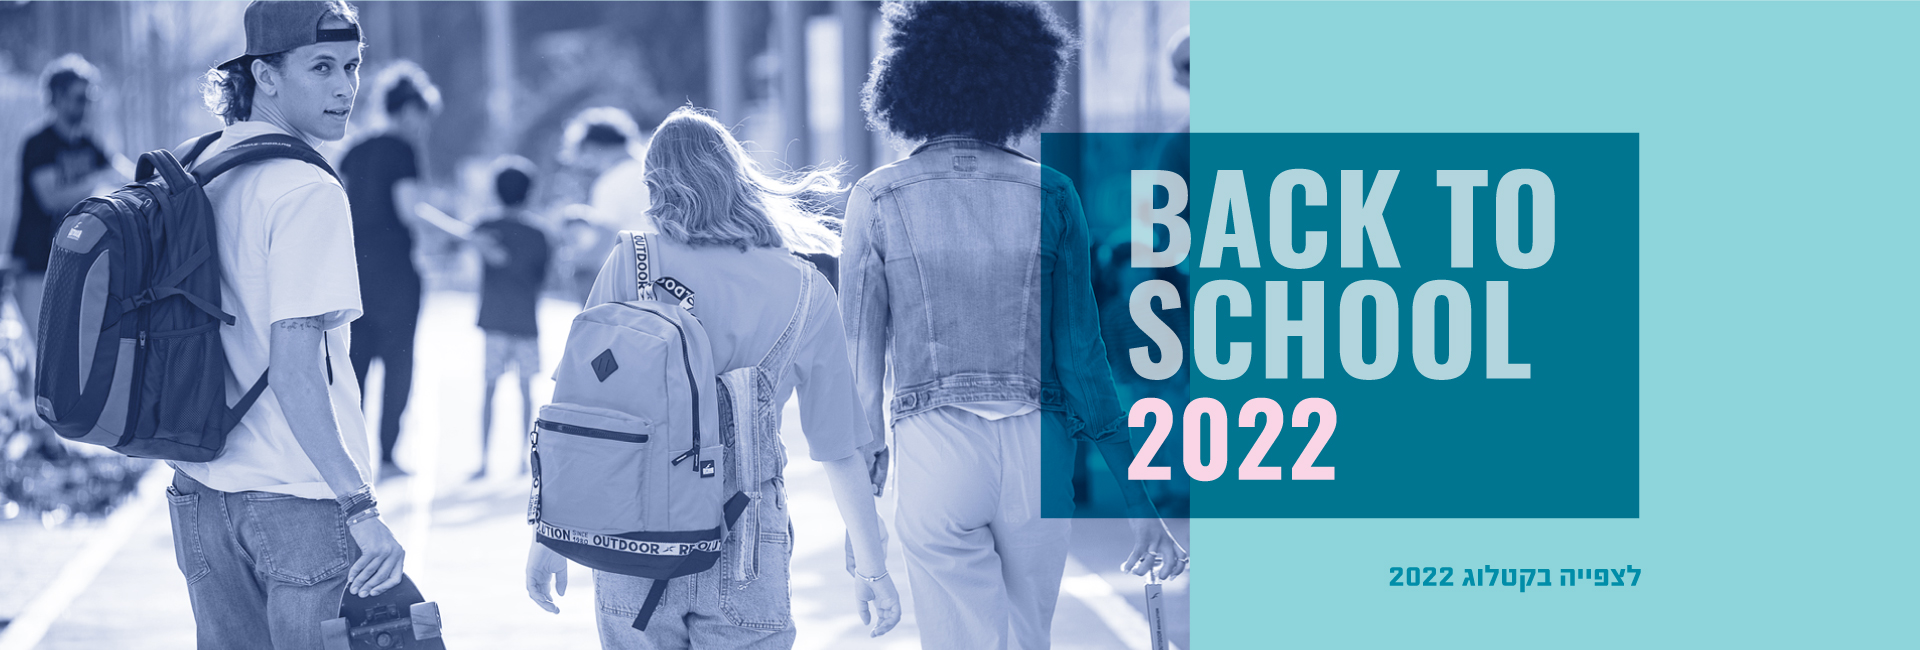 Back To School 2022